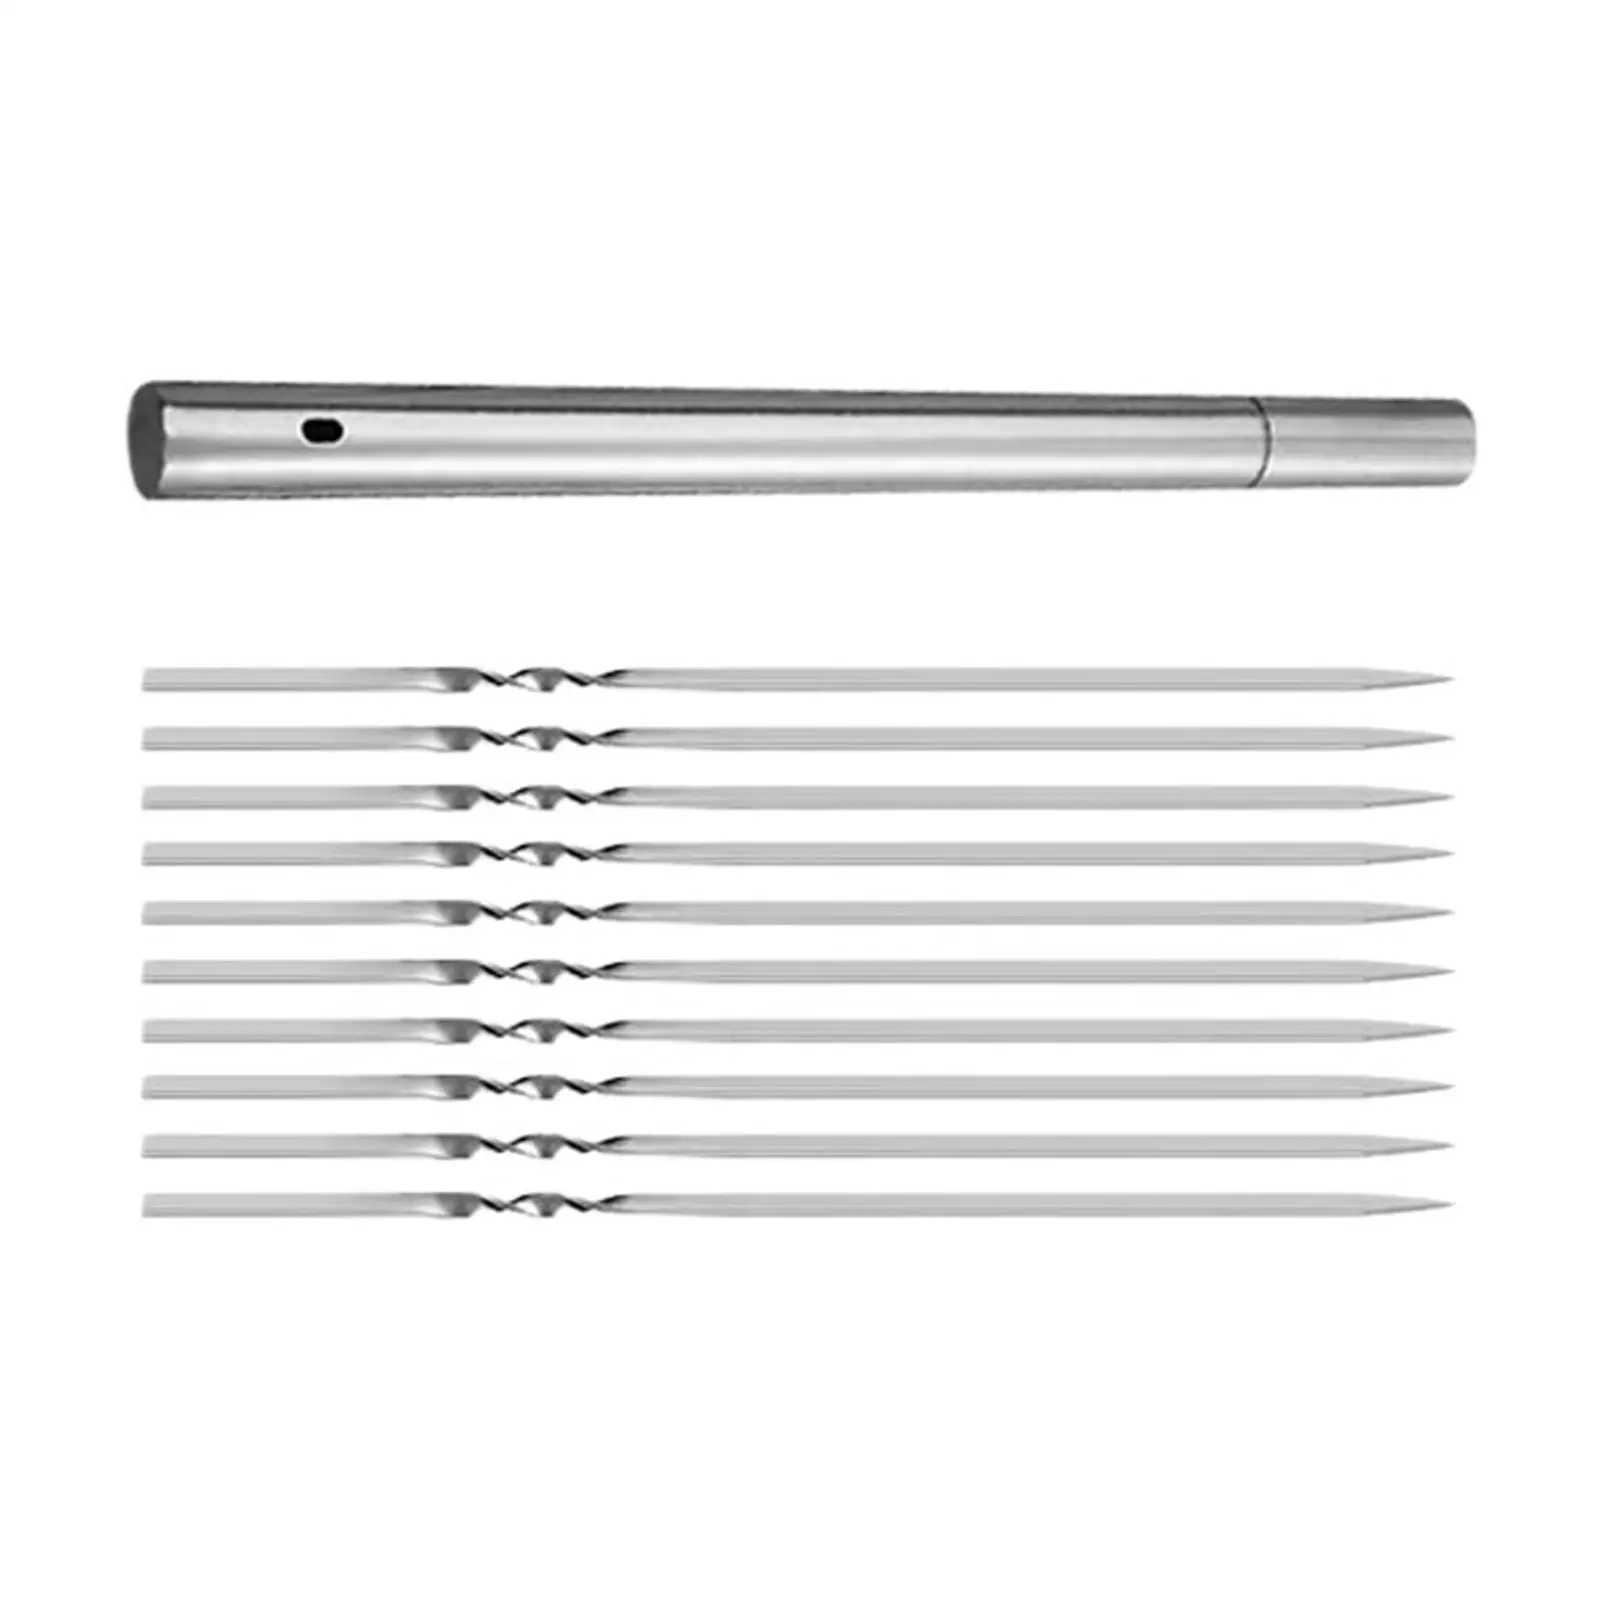 Barbecue Skewers Stainless Steel Grilling BBQ Needle Stick Grilling Skewers